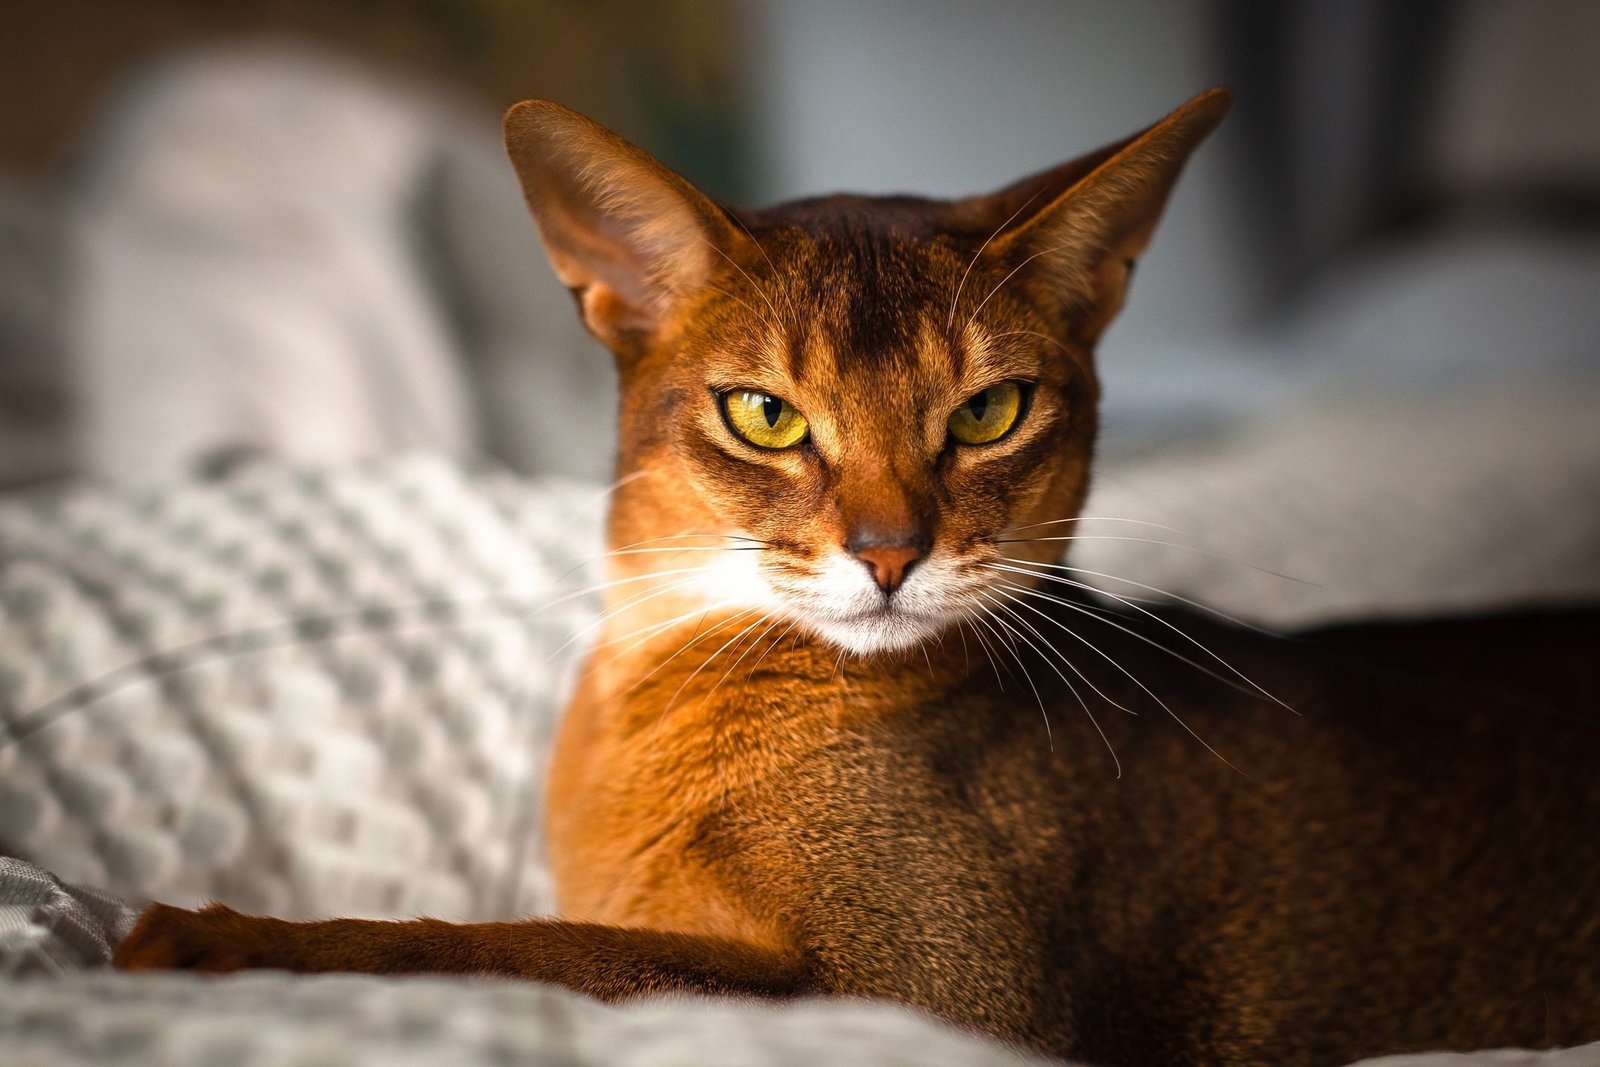 Breeds to Avoid: Abyssinian